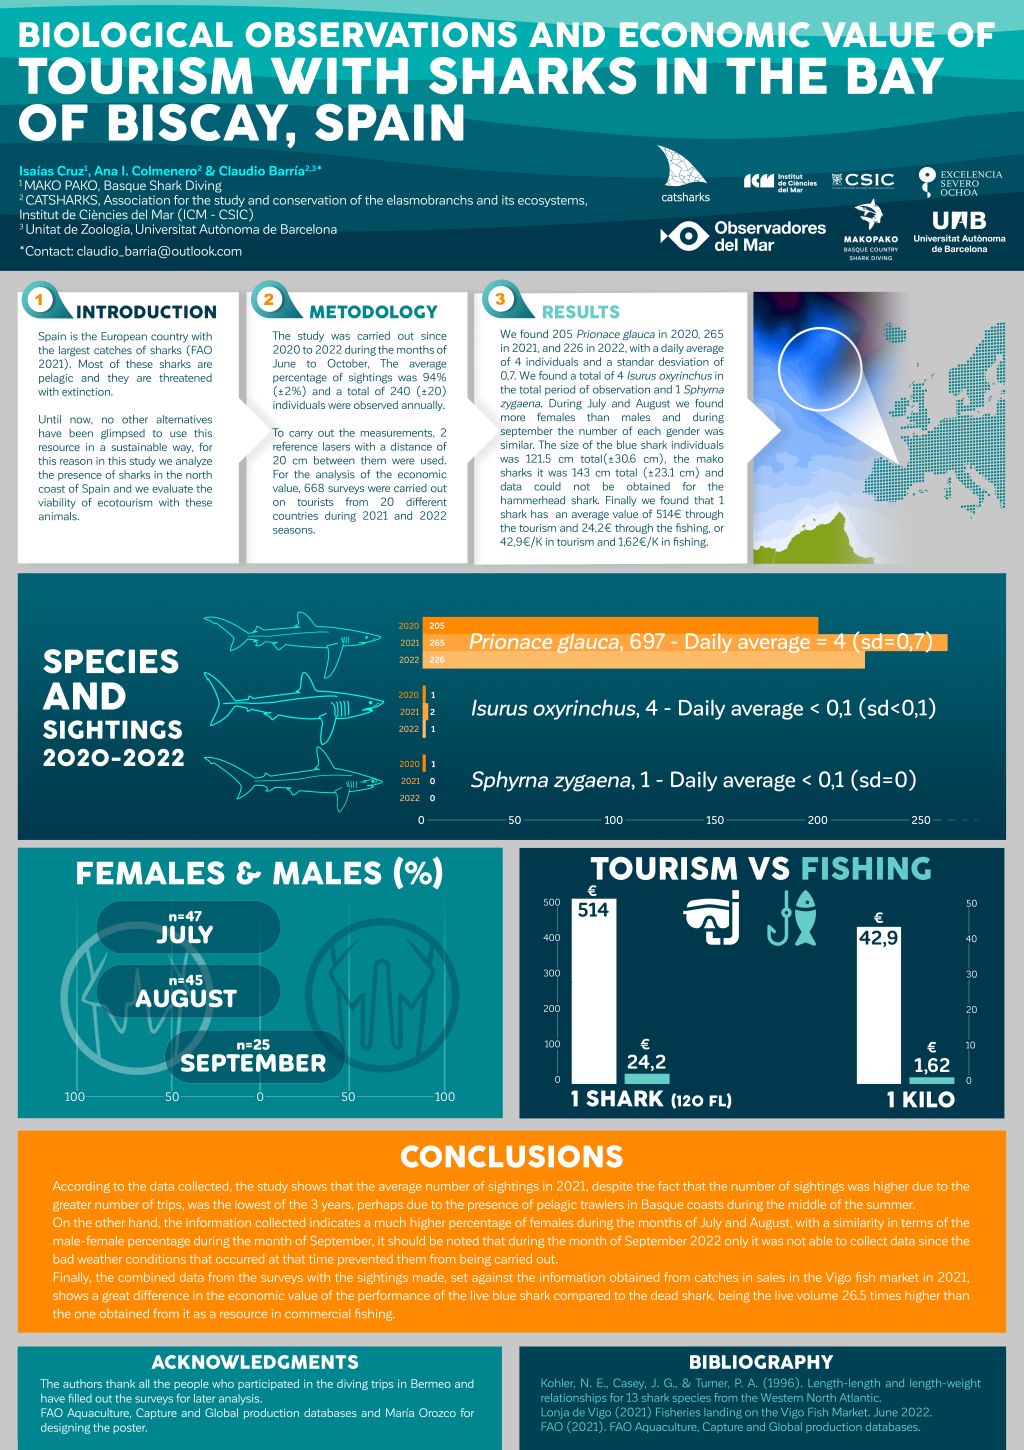 BIOLOGICAL OBSERVATIONS AND ECONOMIC VALUE OF SHARK TOURISM IN BAY OF BISCAY, SPAIN